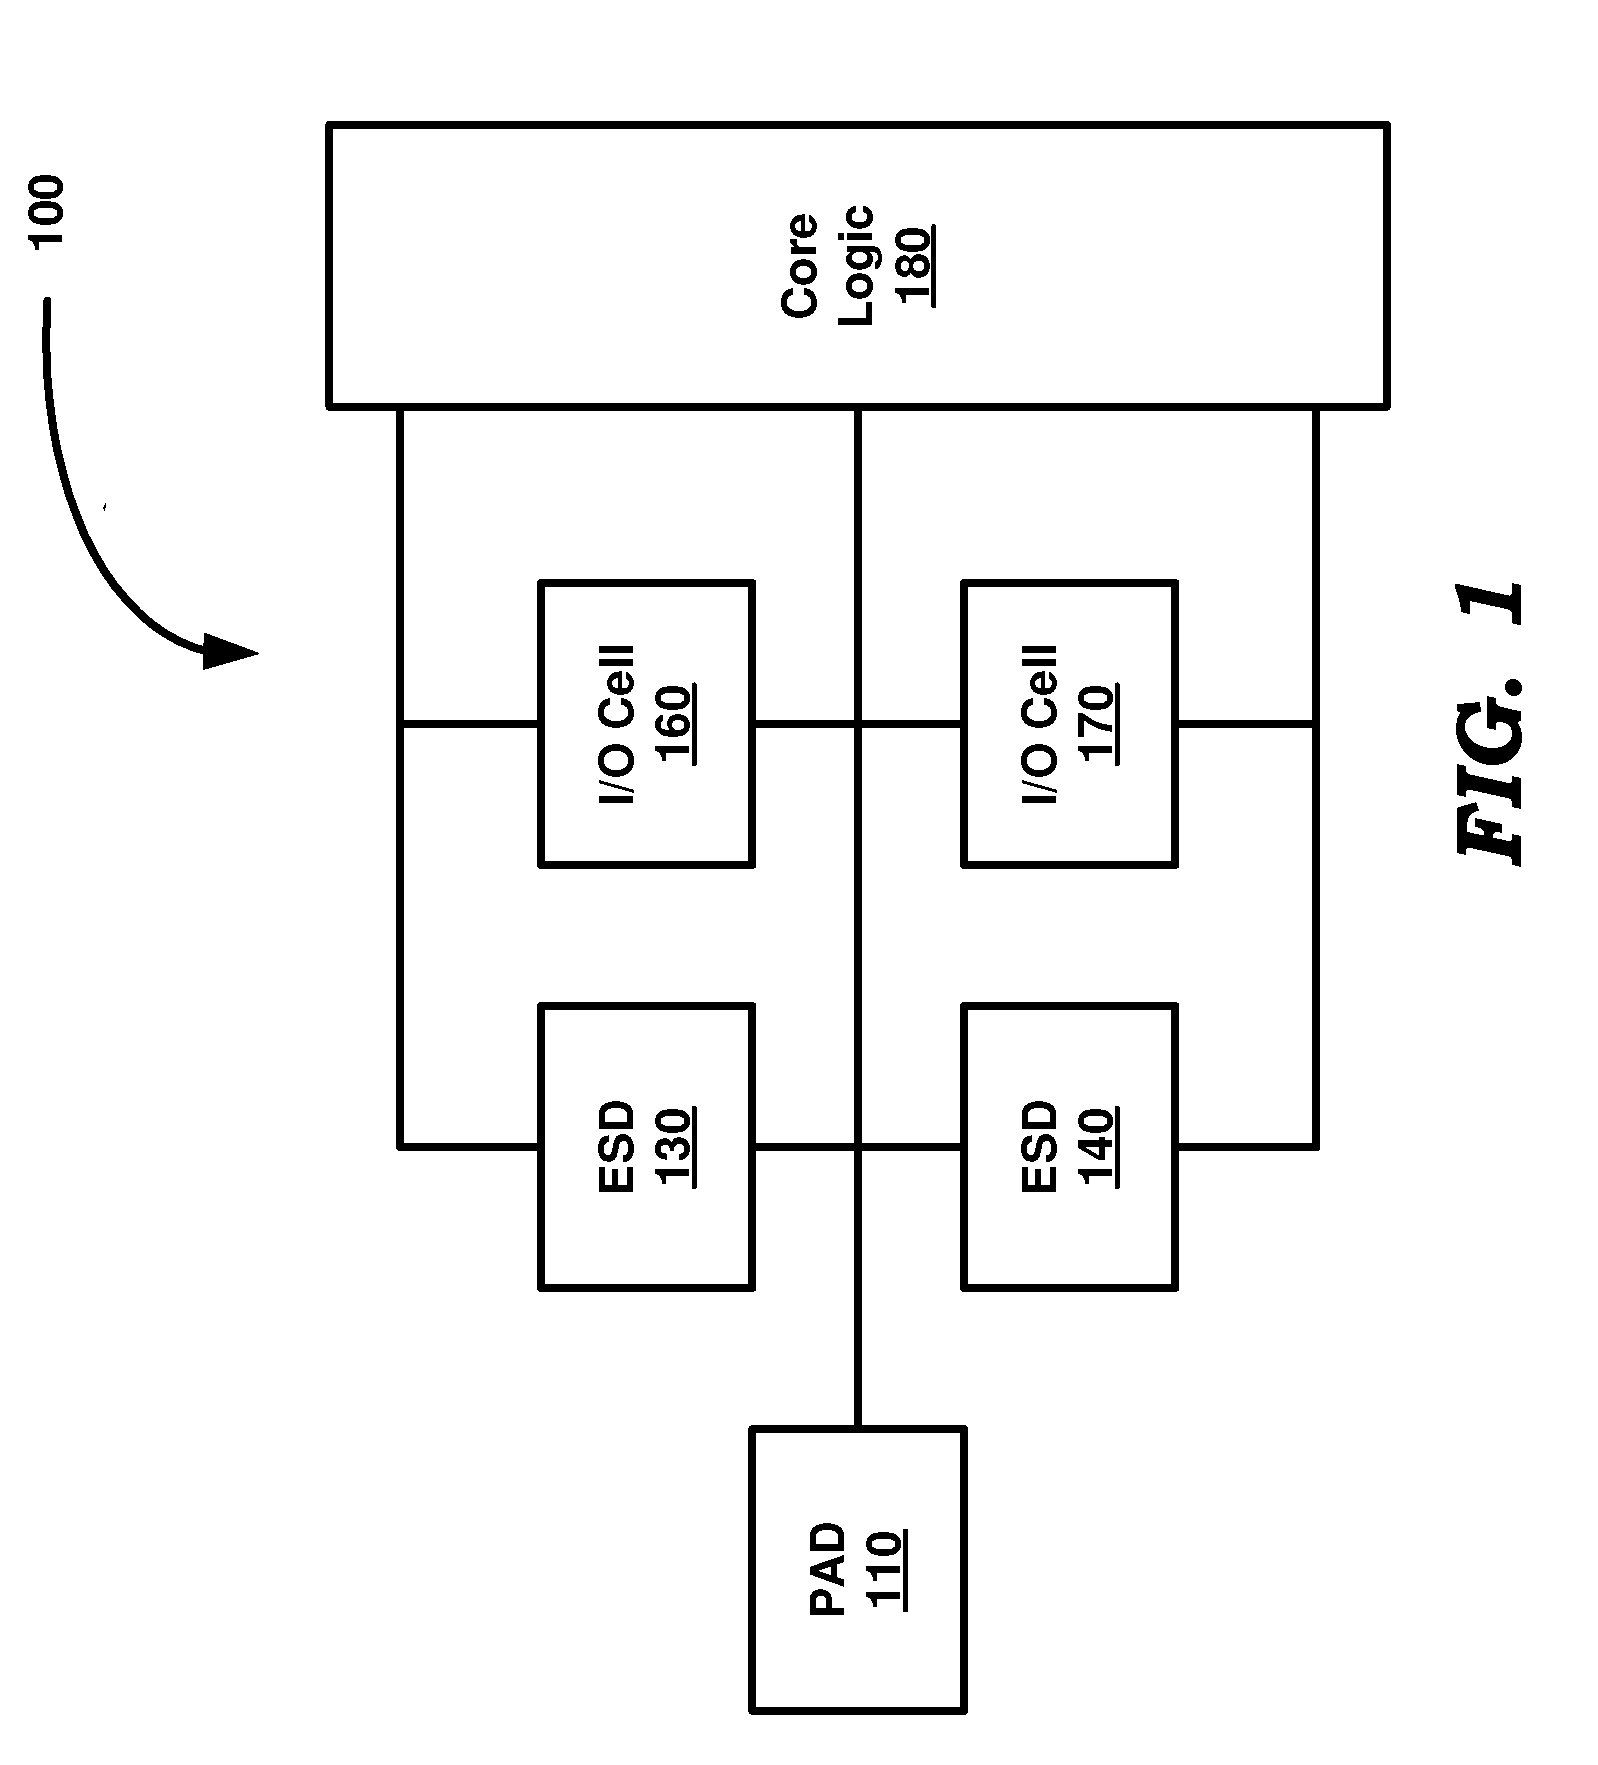 Validation Of An Integrated Circuit For Electro Static Discharge Compliance